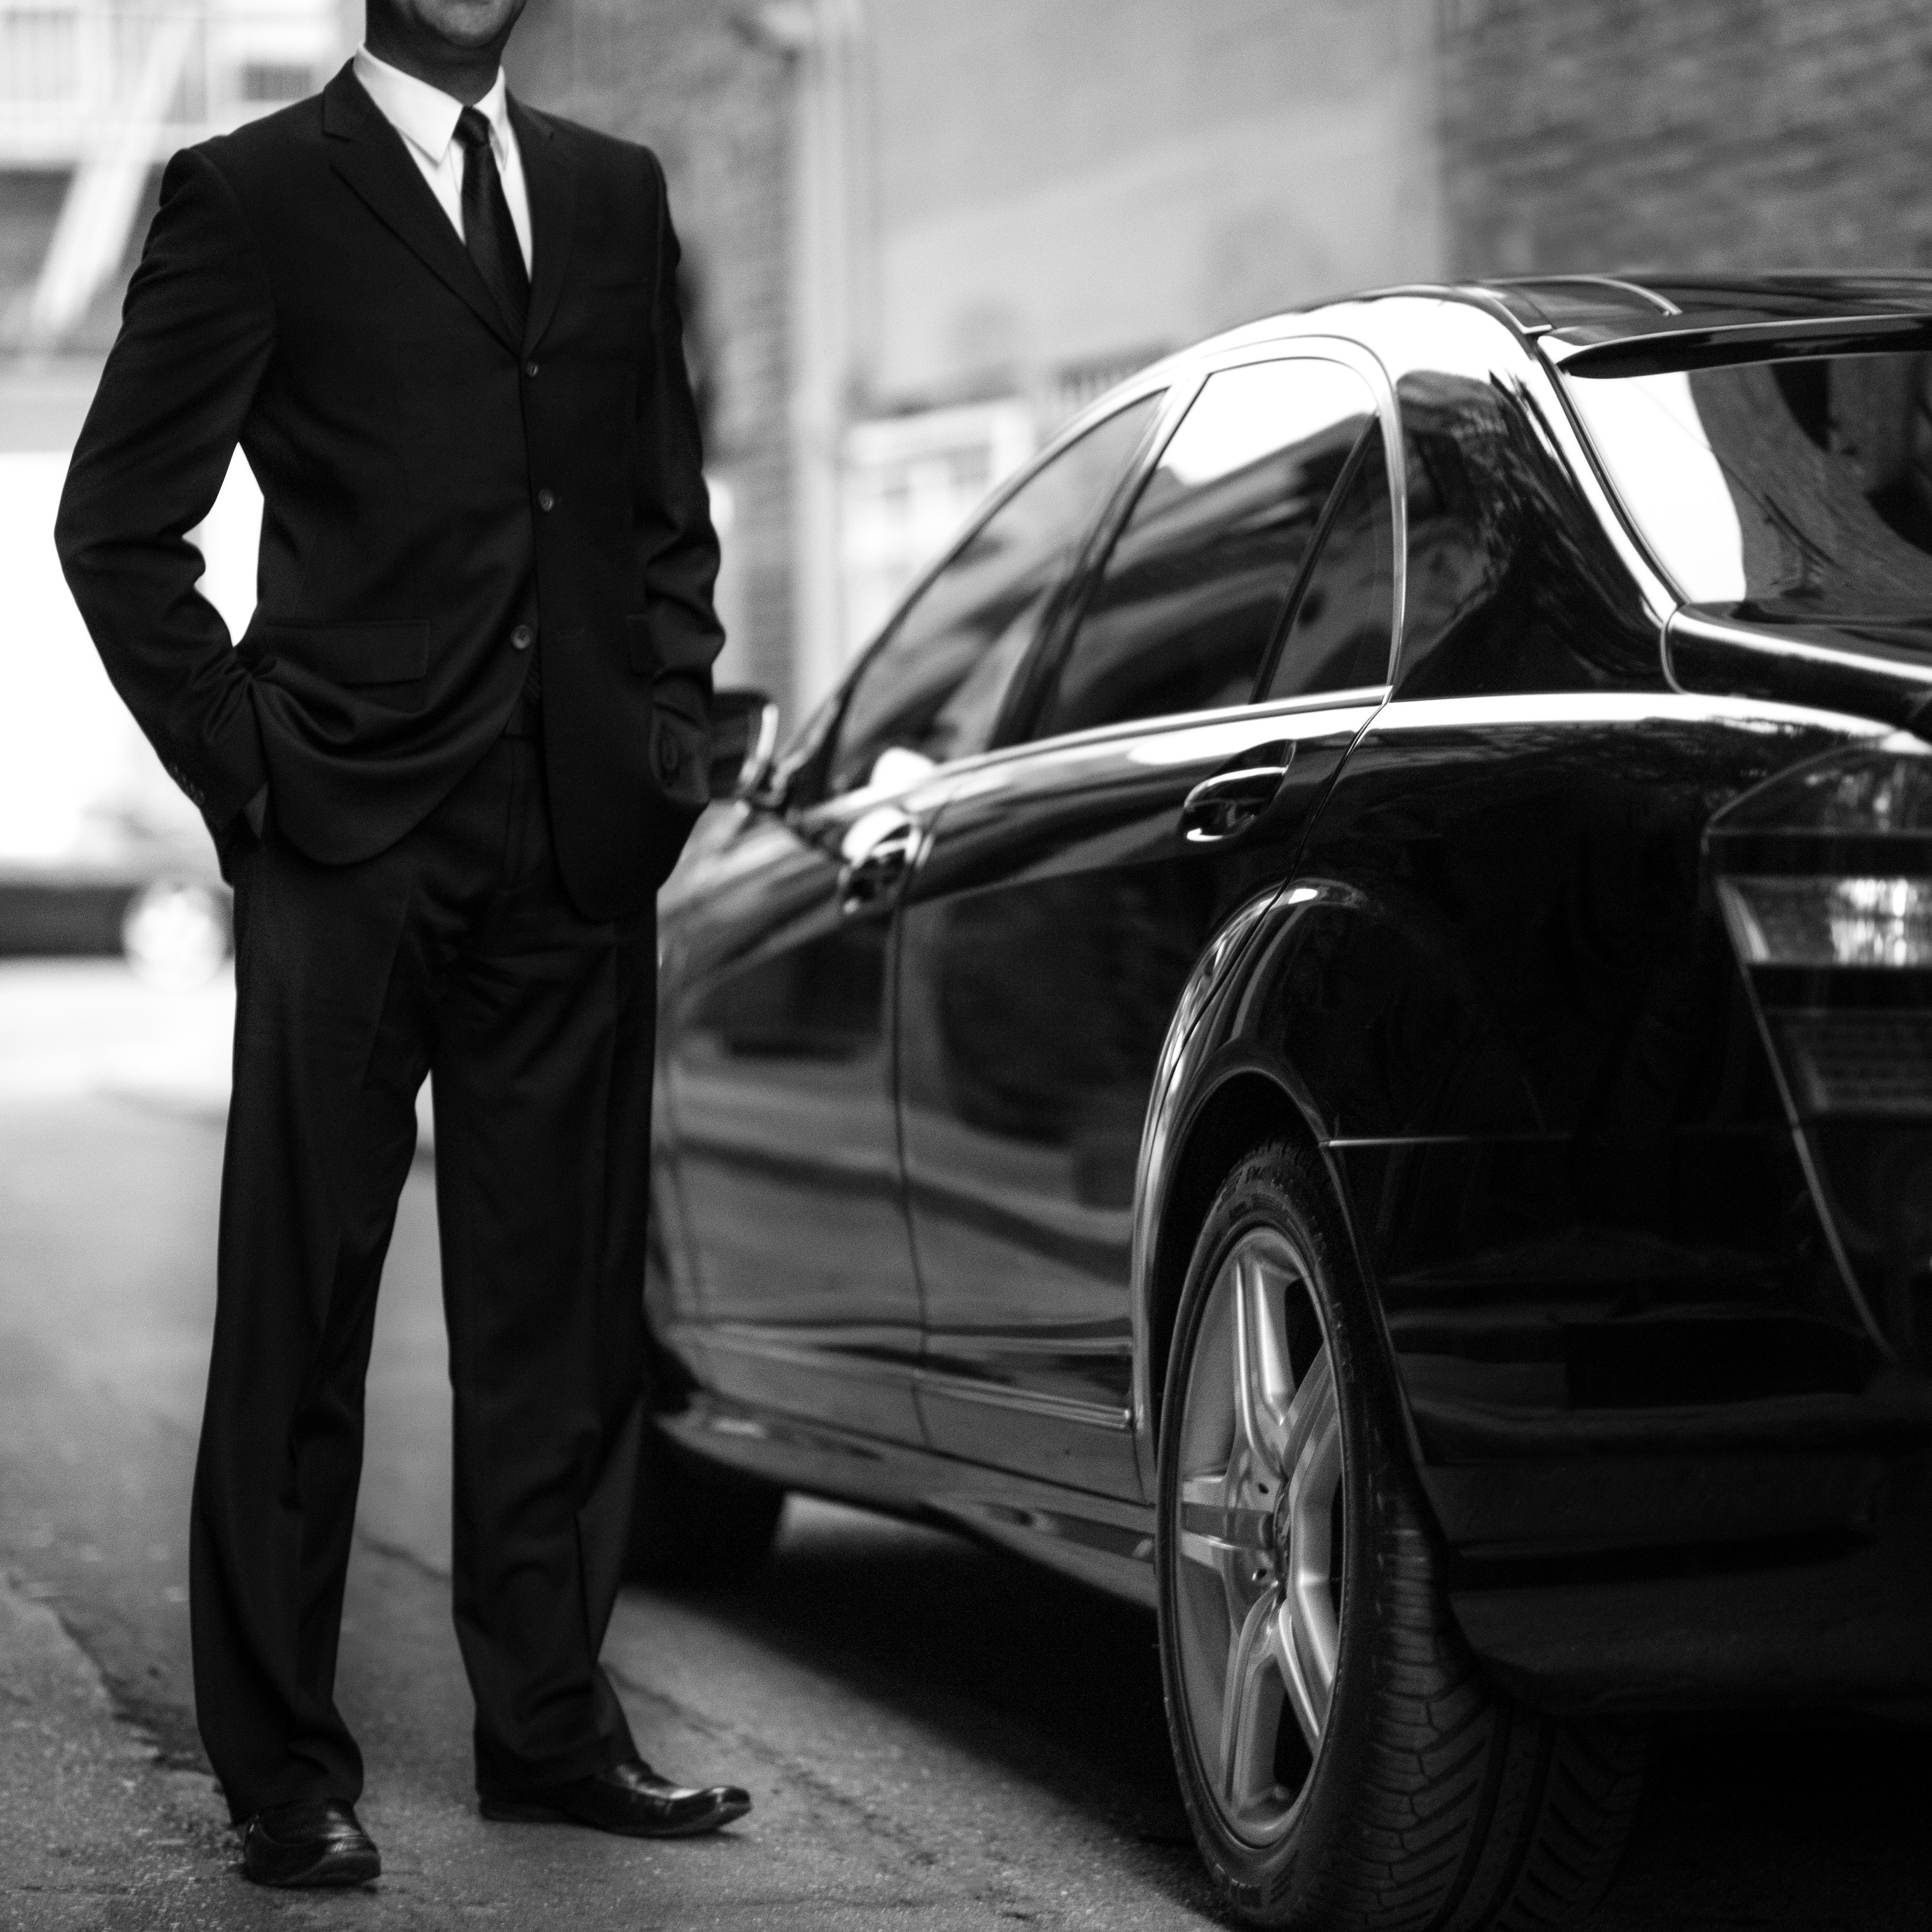 Book a private chauffeur with your concierge service